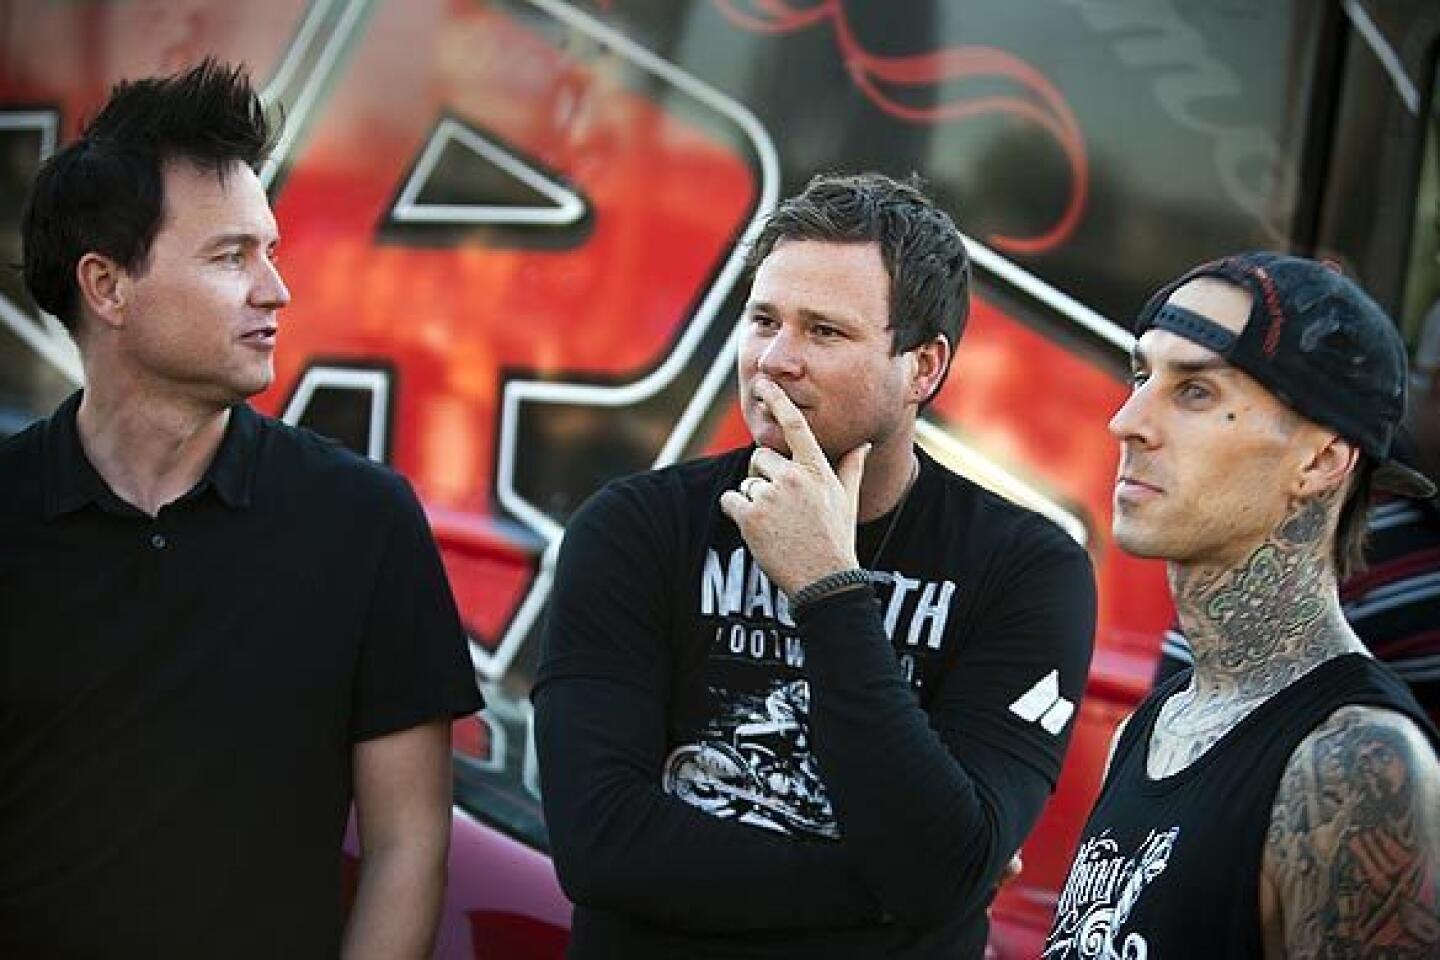 14 things blink-182's Untitled album taught us